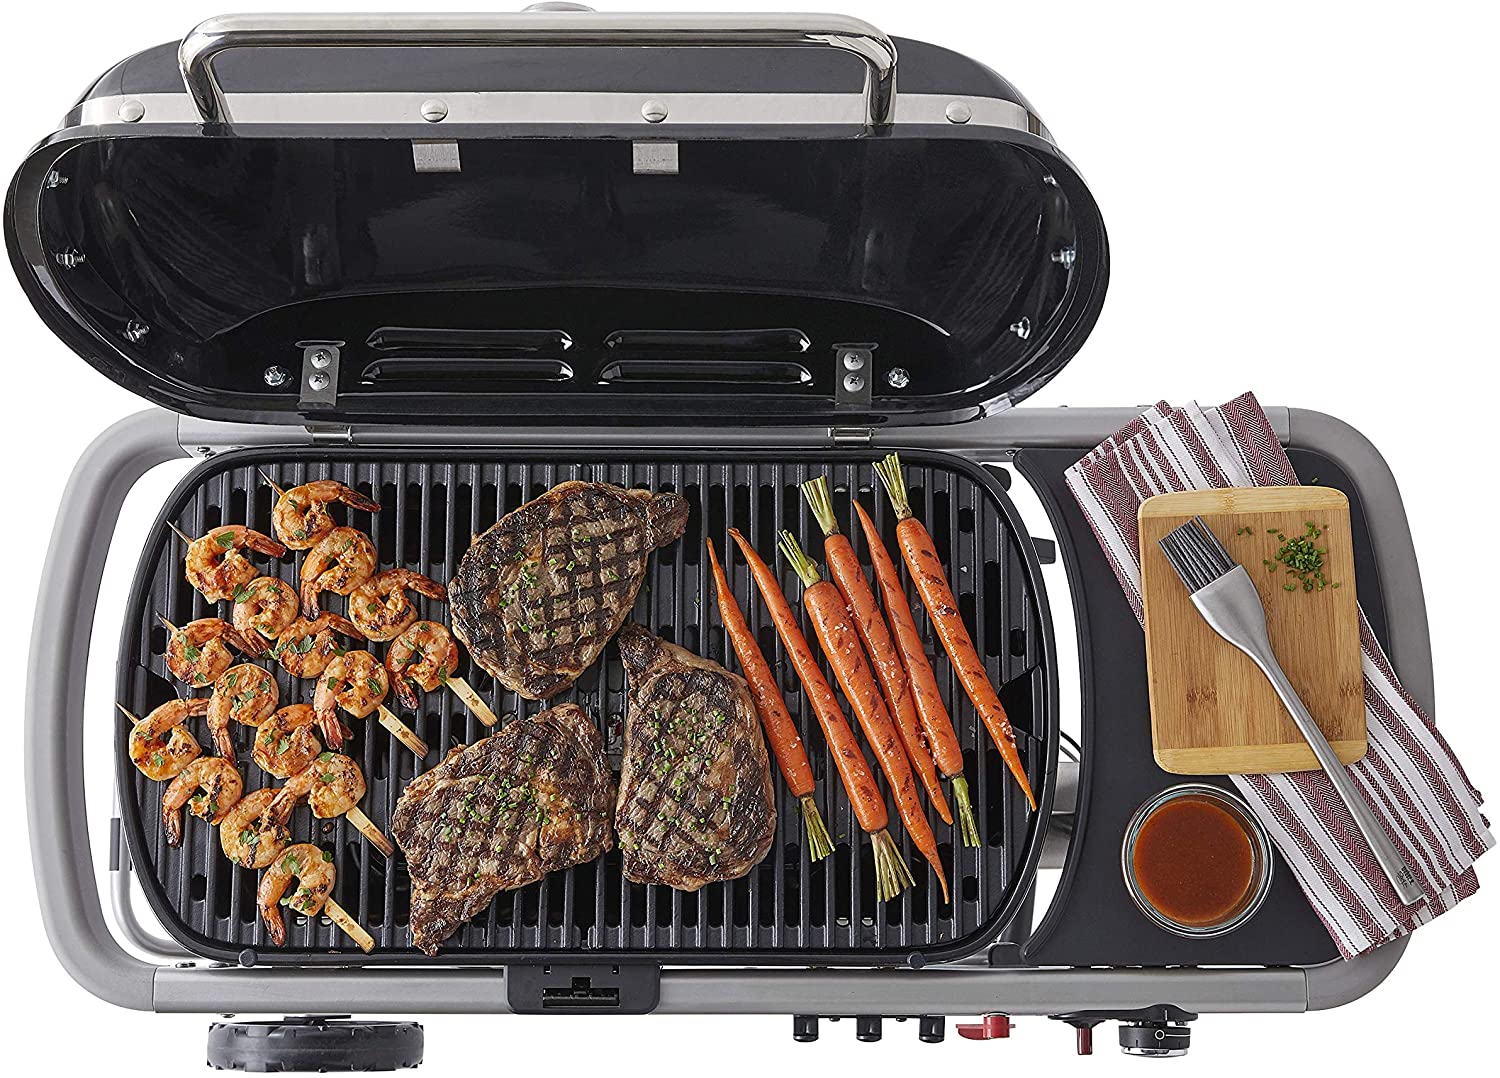 Large Cooking Area Weber Traveler Best Portable Gas Grill review